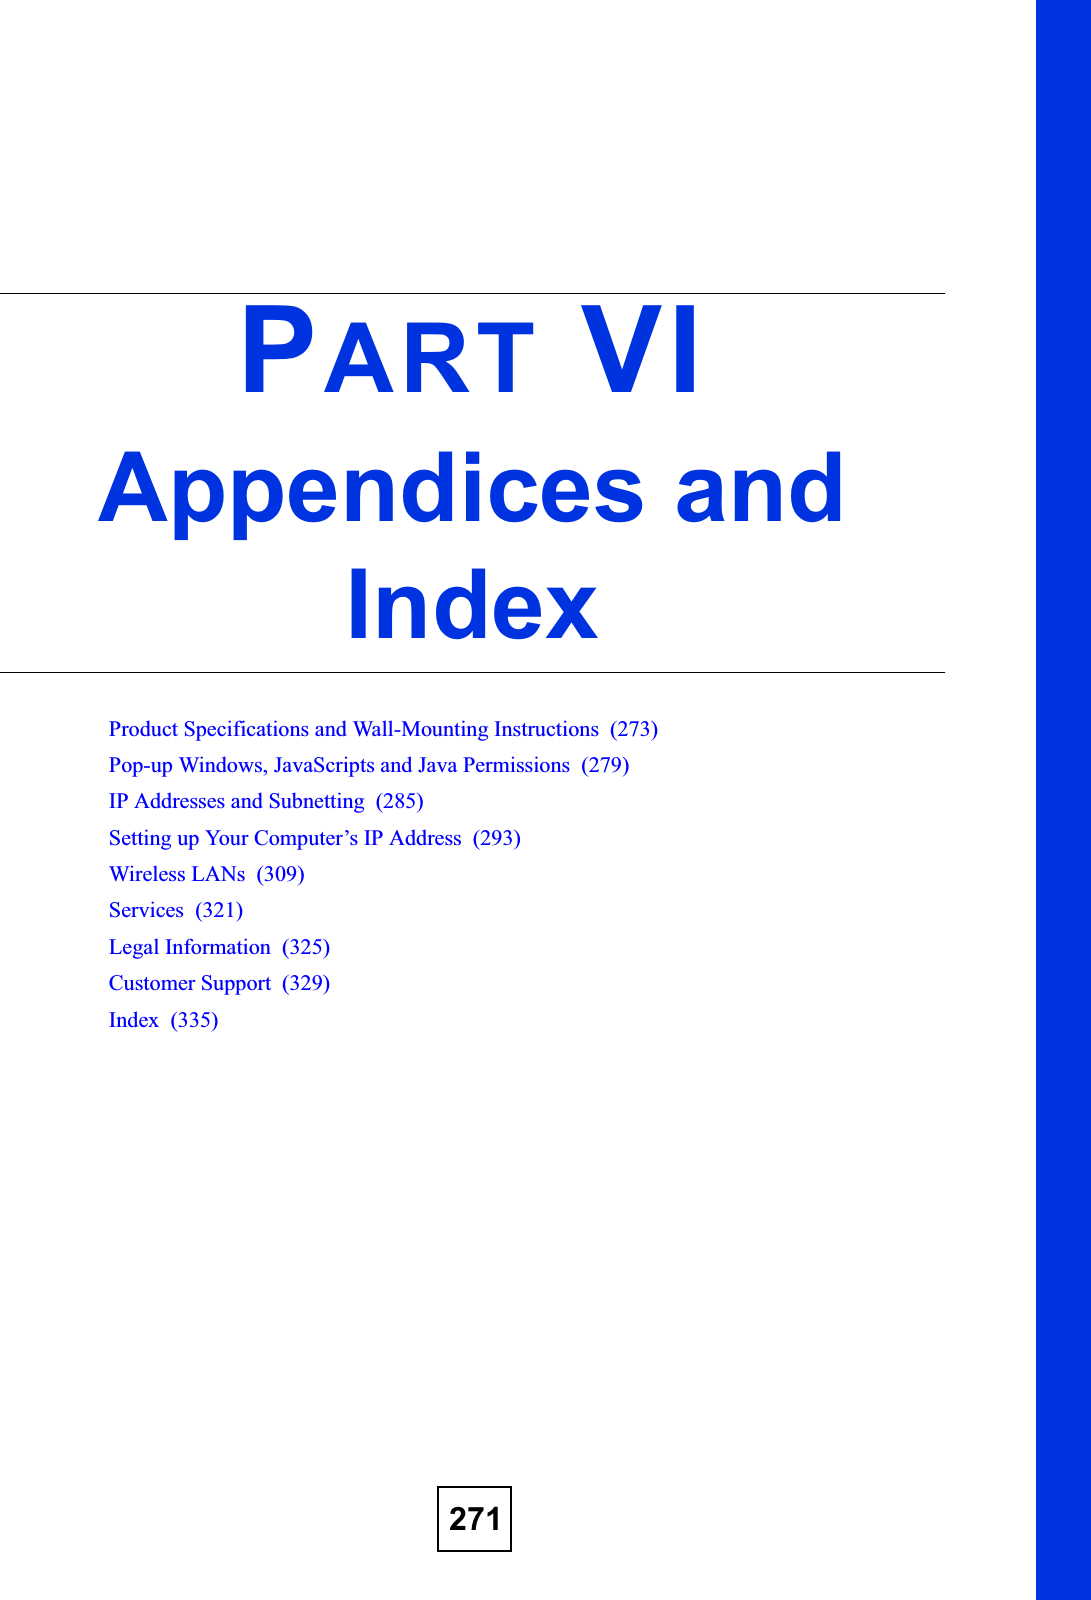 271PART VIAppendices and IndexProduct Specifications and Wall-Mounting Instructions  (273)Pop-up Windows, JavaScripts and Java Permissions  (279)IP Addresses and Subnetting  (285)Setting up Your Computer’s IP Address  (293)Wireless LANs  (309)Services  (321)Legal Information  (325)Customer Support  (329)Index  (335)